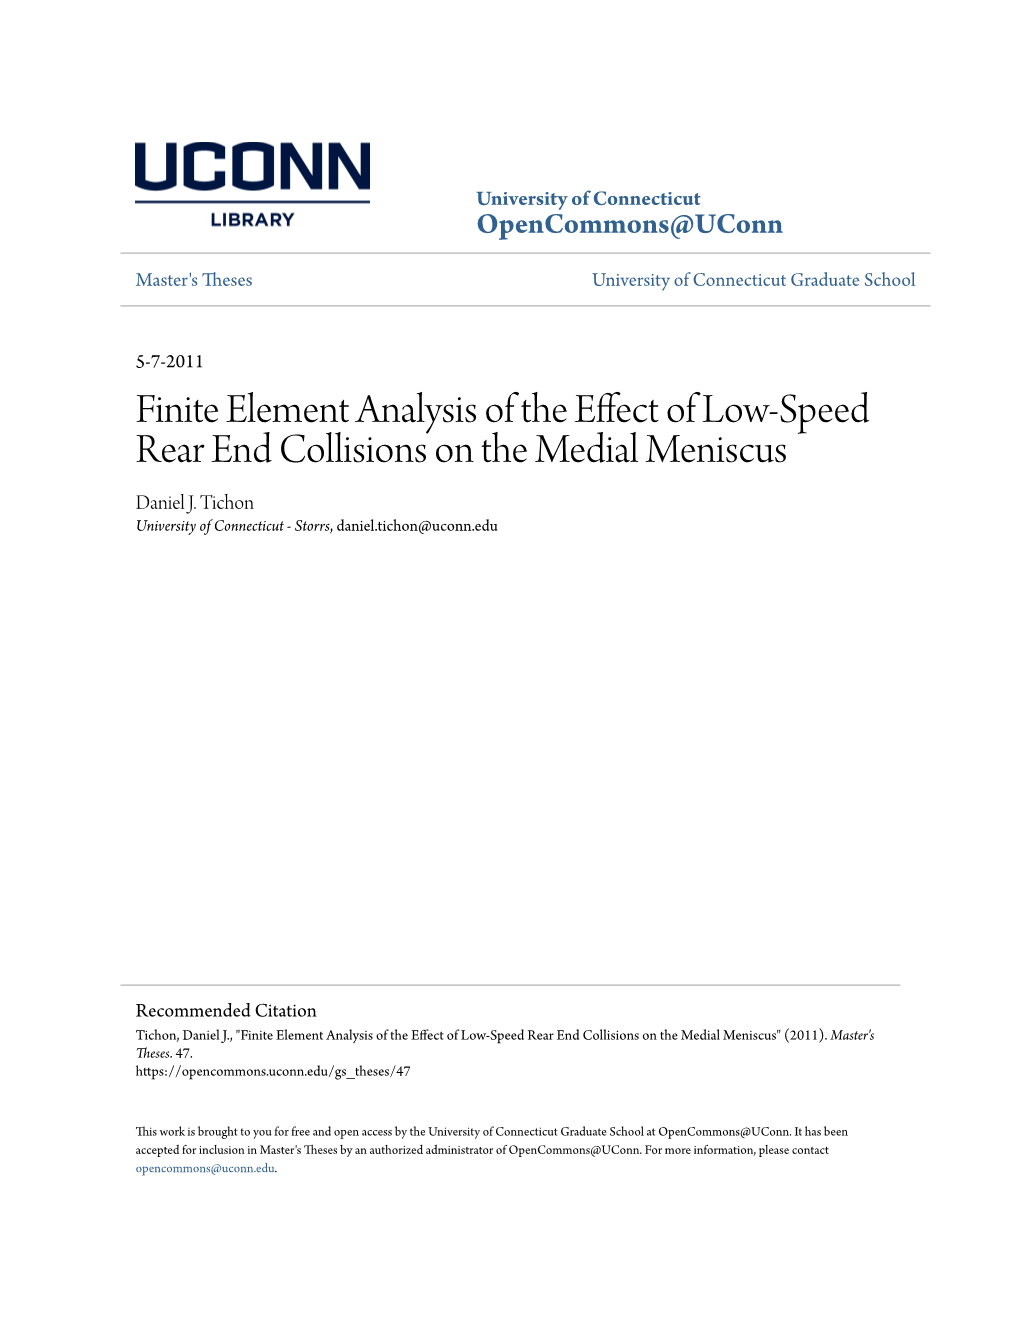 Finite Element Analysis of the Effect of Low-Speed Rear End Collisions on the Medial Meniscus Daniel J